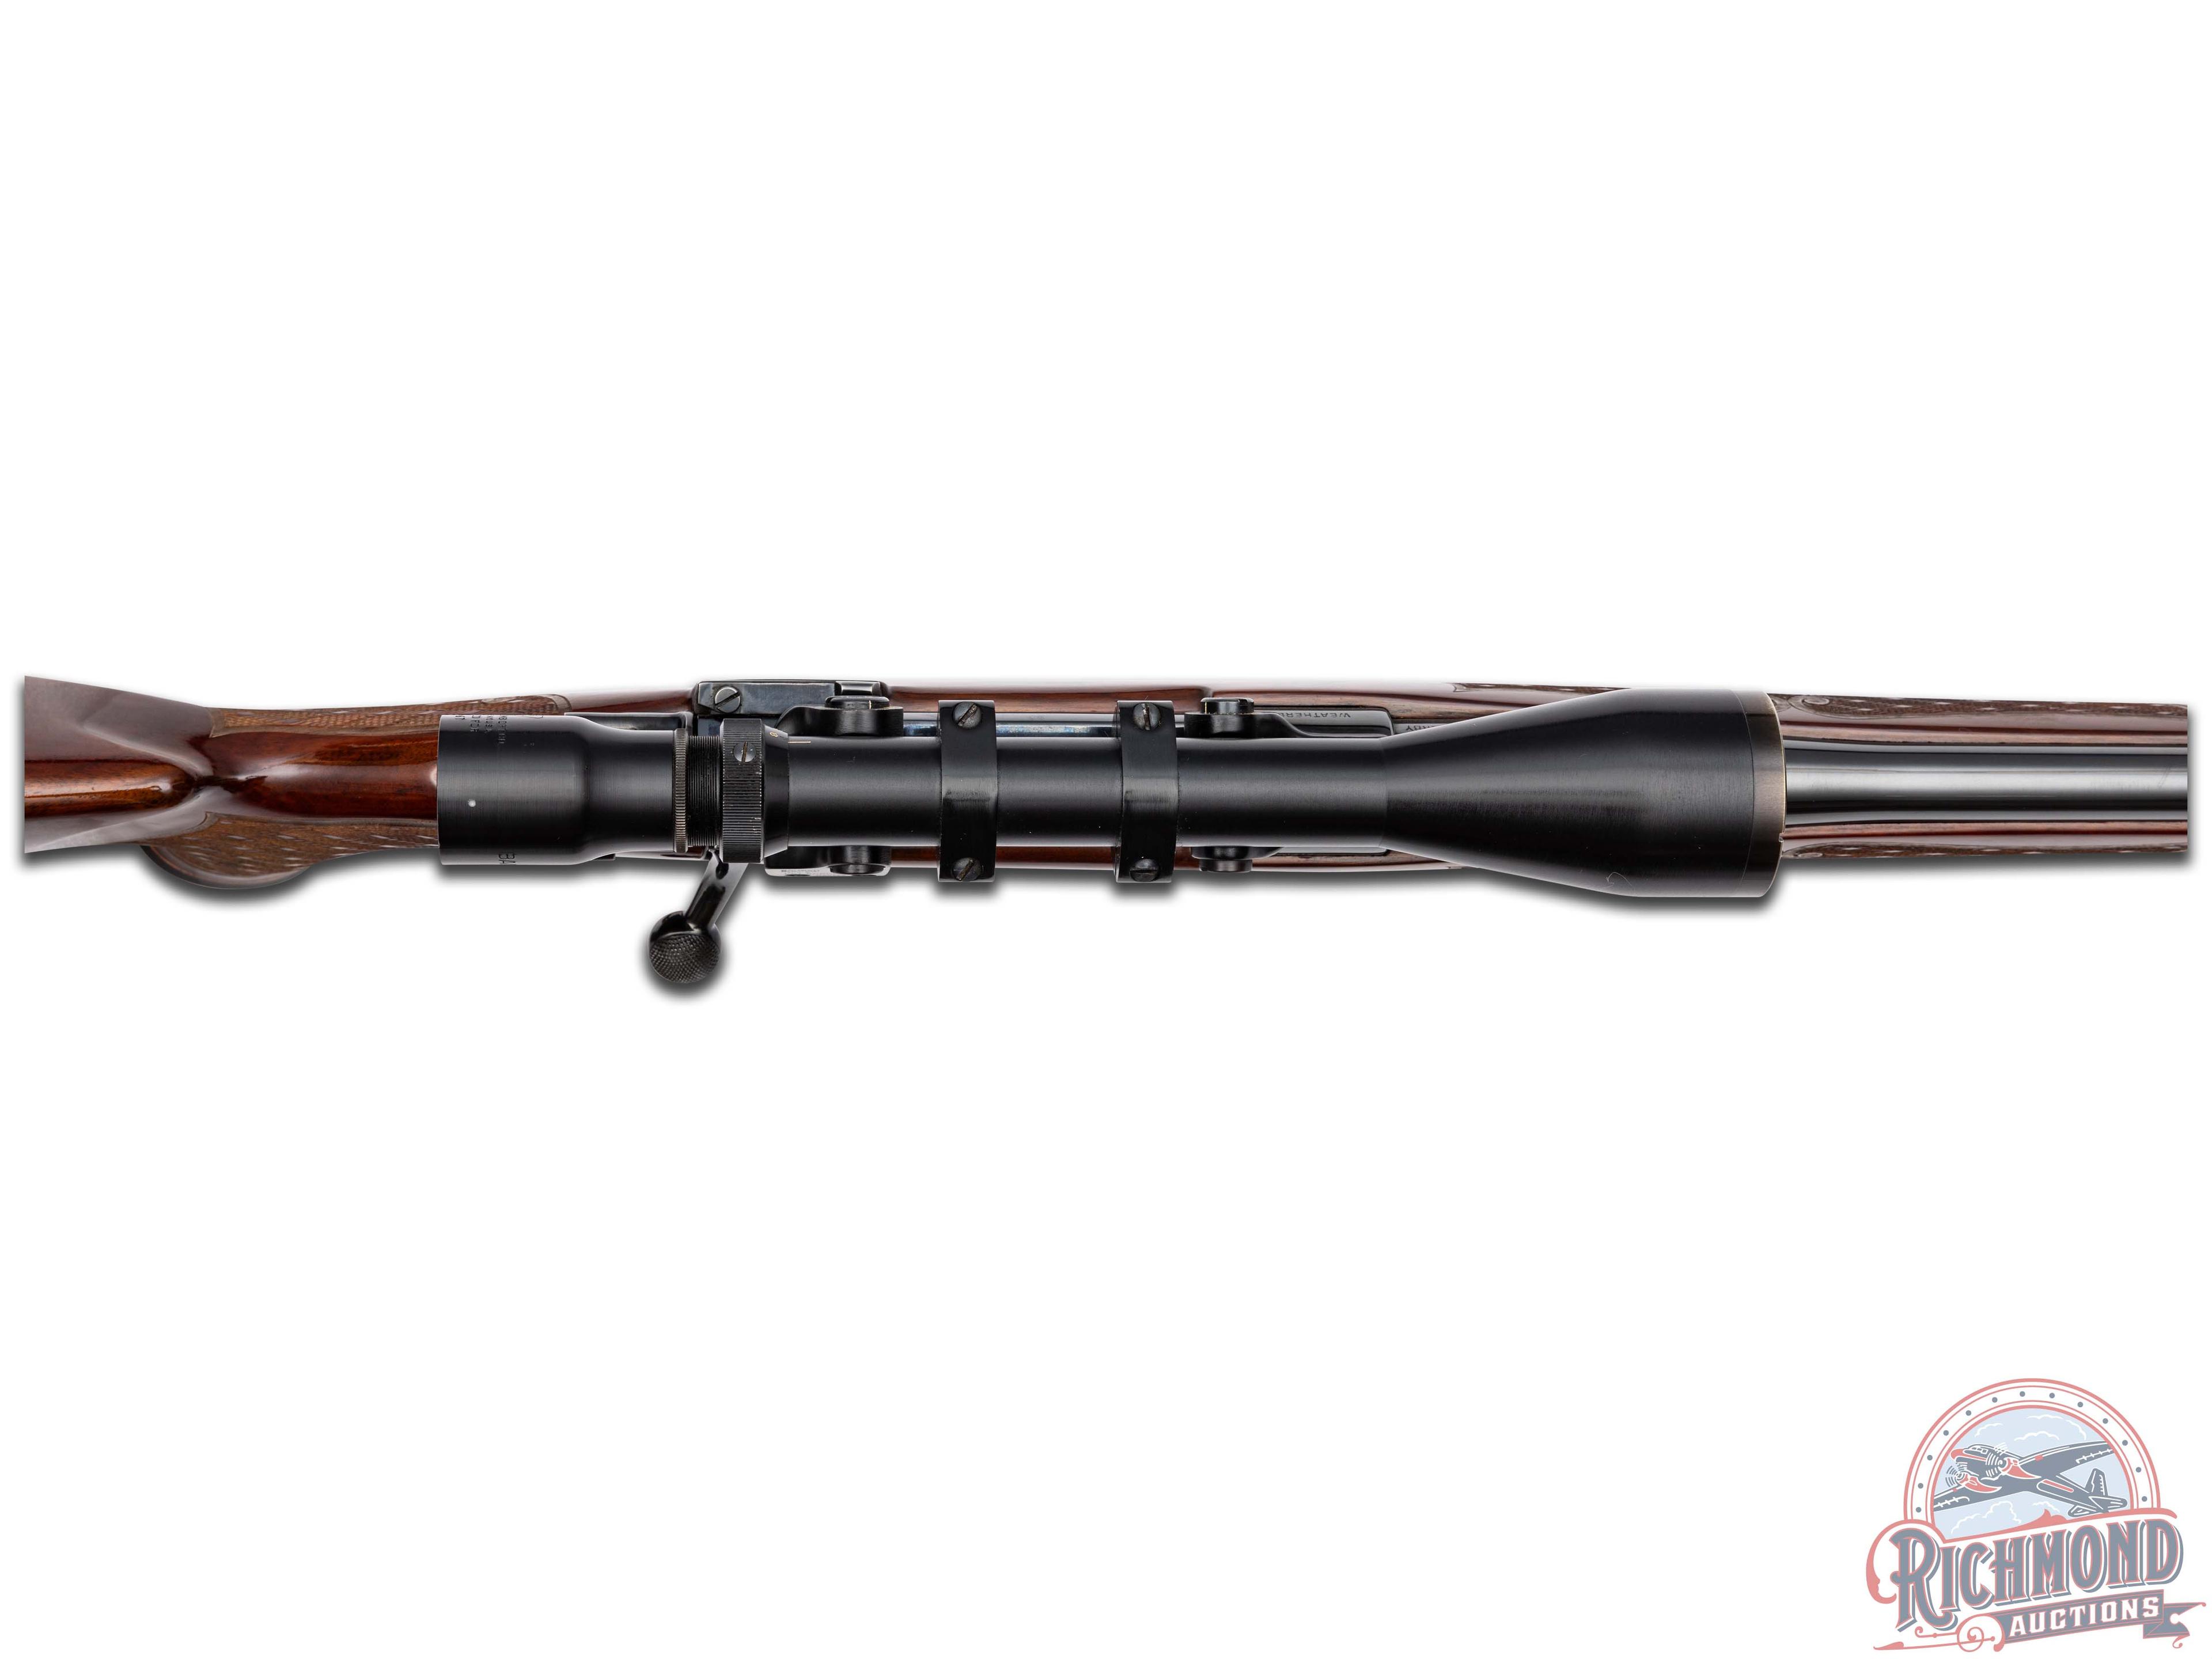 1957 Weatherby South Gate, CA Mauser Series Bolt Action Rifle in 300 WBY Mag & Scope